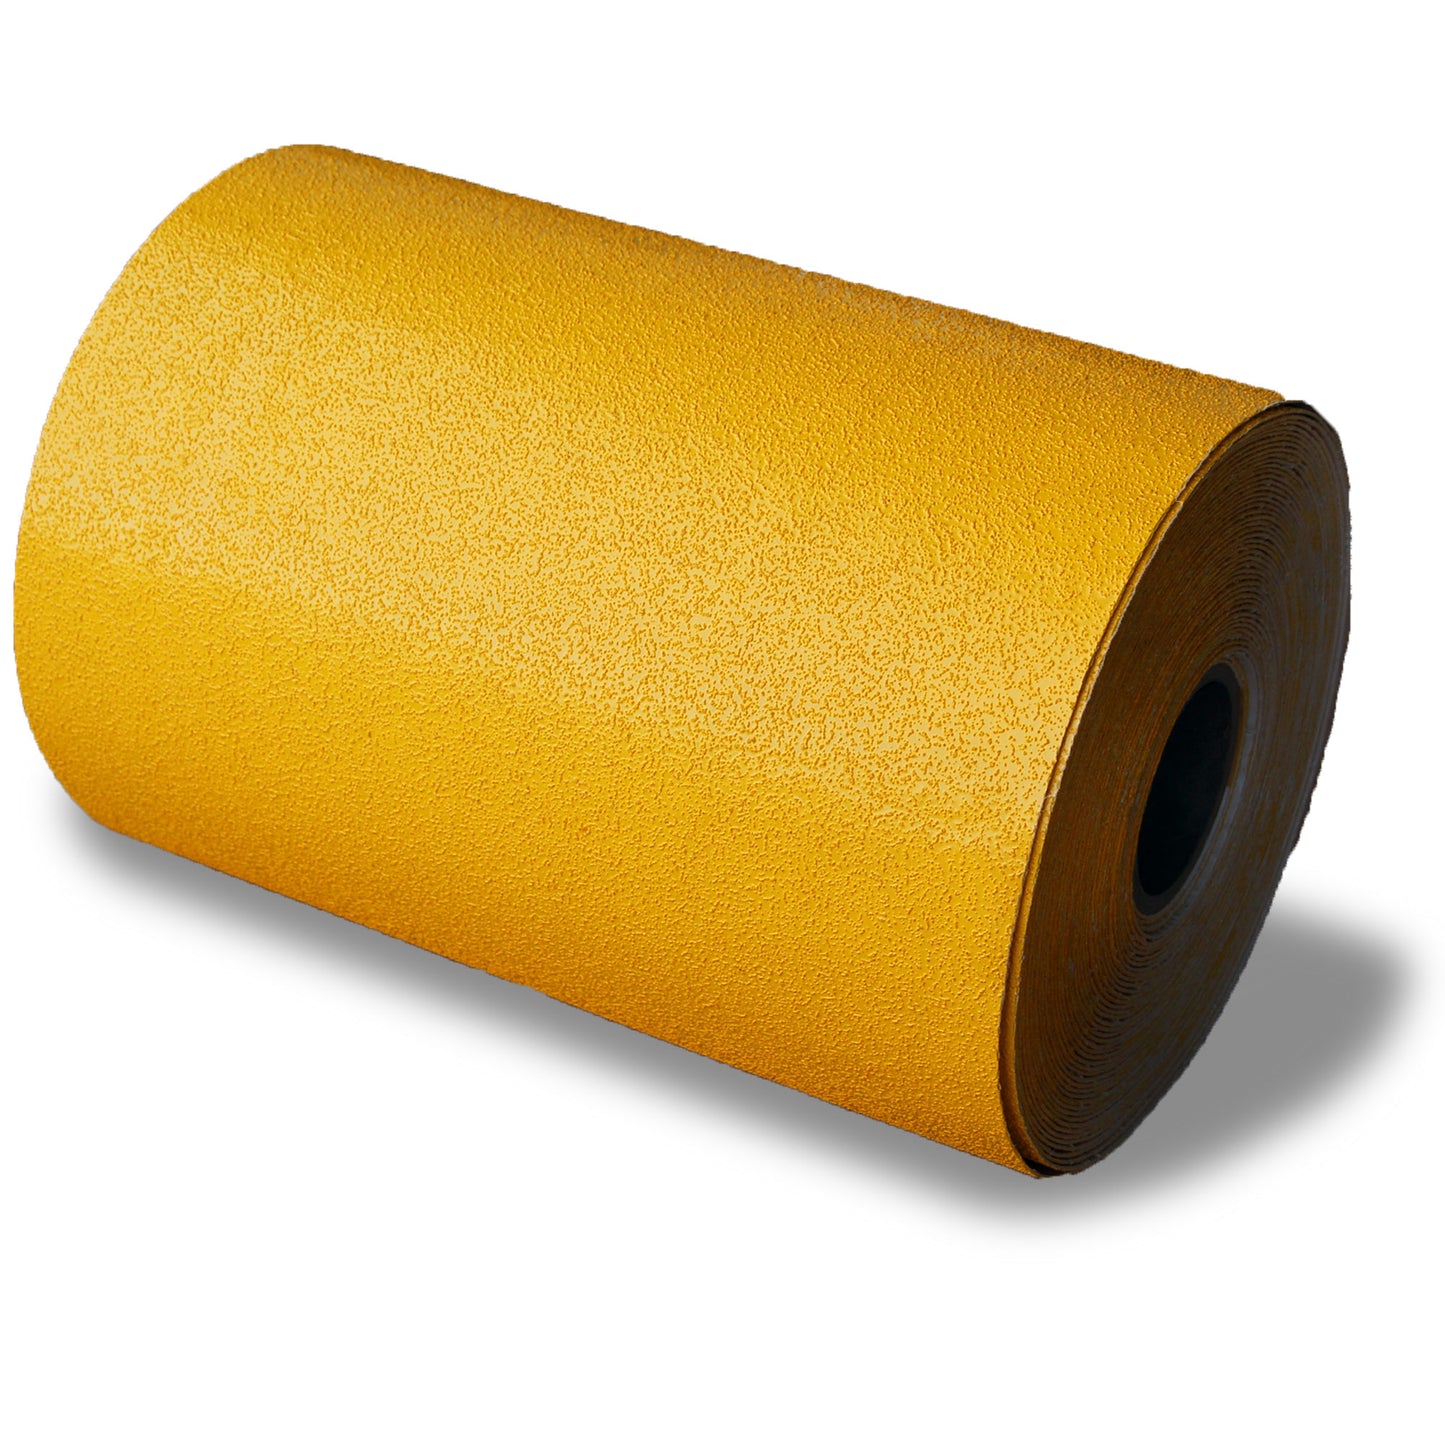 A roll of yellow thermoplastic for lines